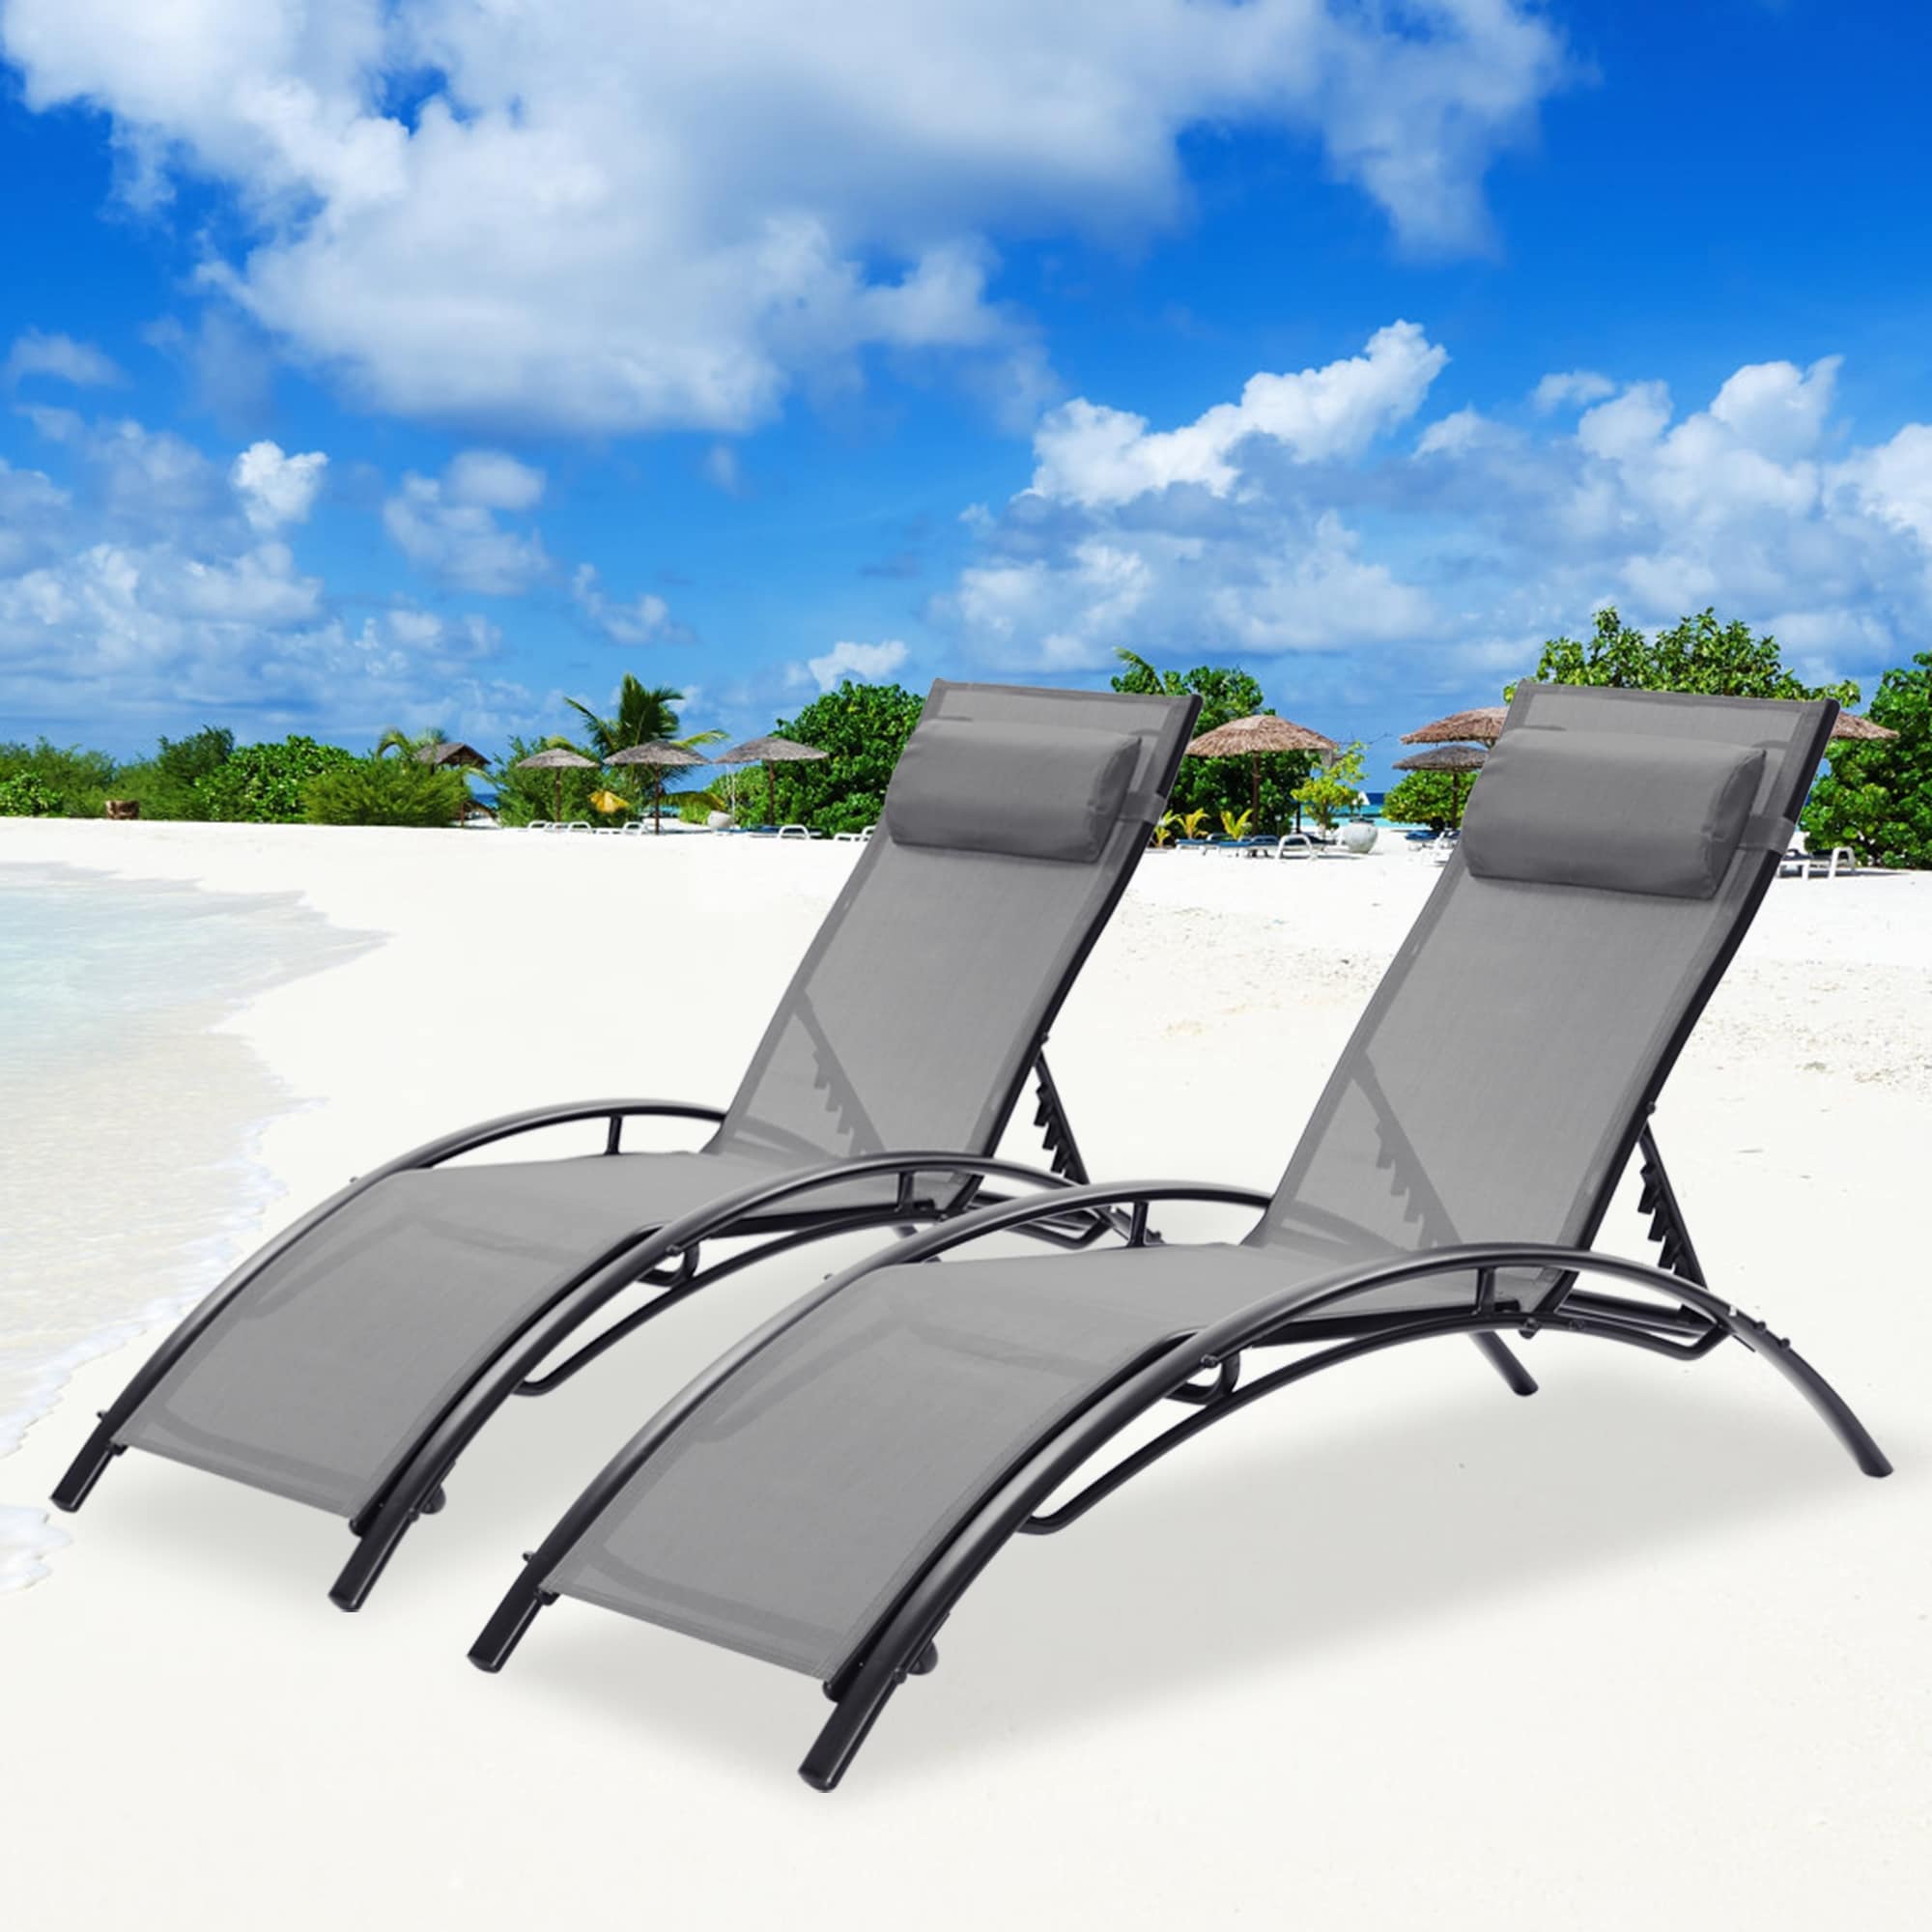 2pcs Set Chaise Lounges Outdoor Lounge Chair Lounger Recliner Chair For Patio Lawn Beach Pool Side Sunbathing